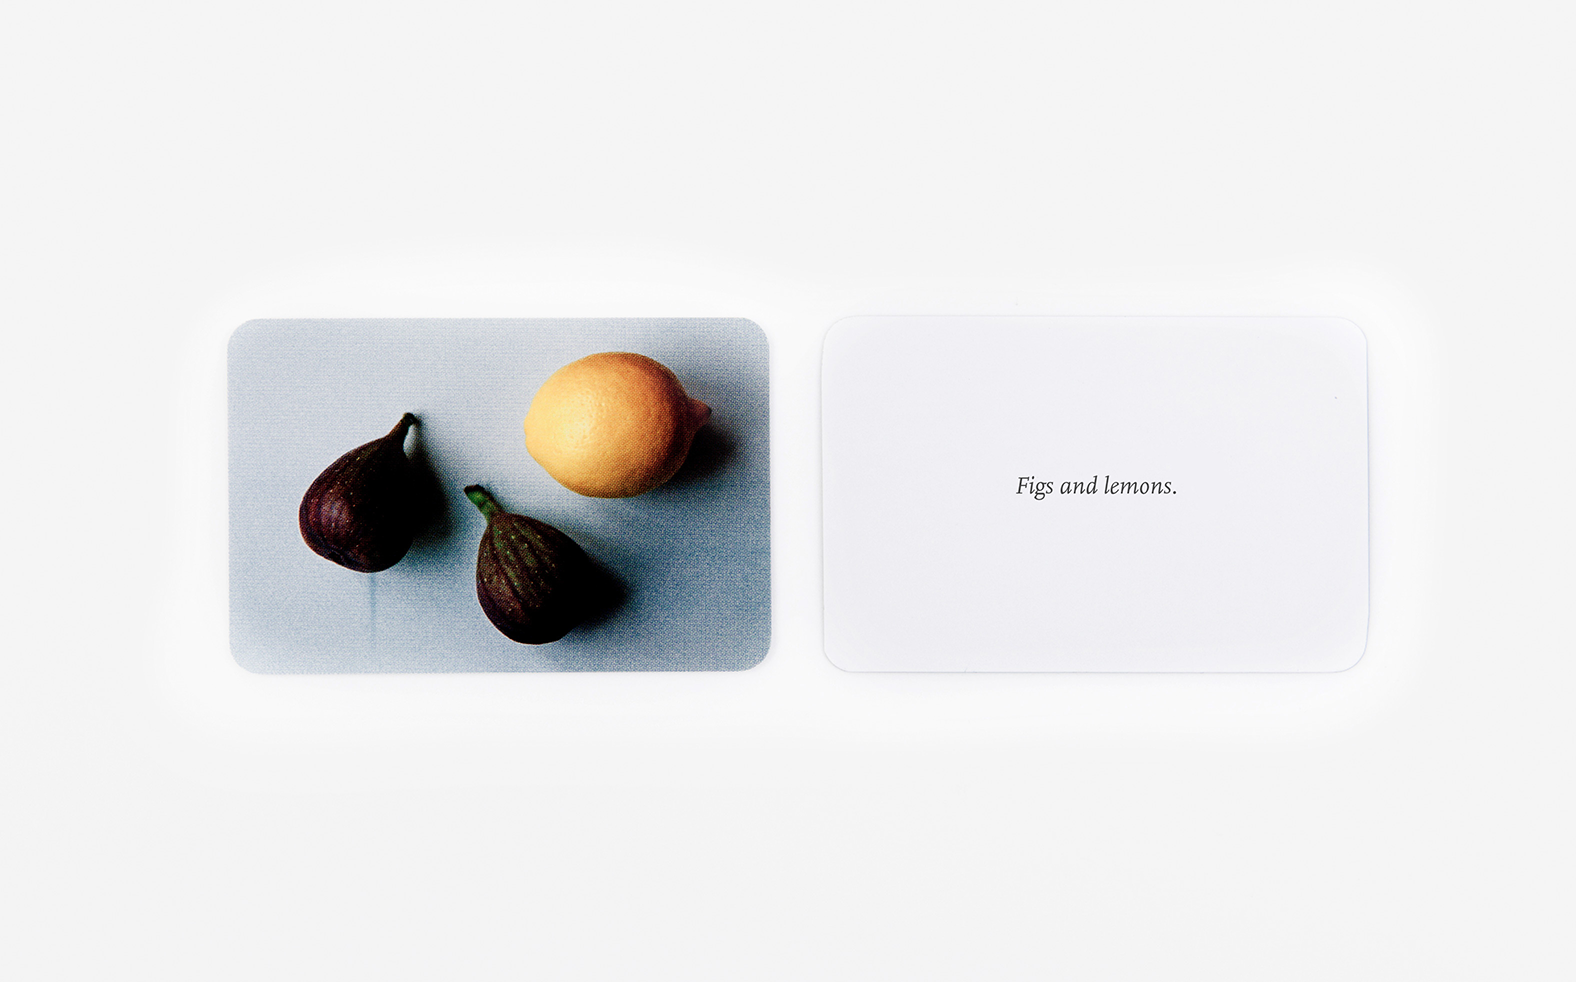 The School of Life Small Pleasures Card Set